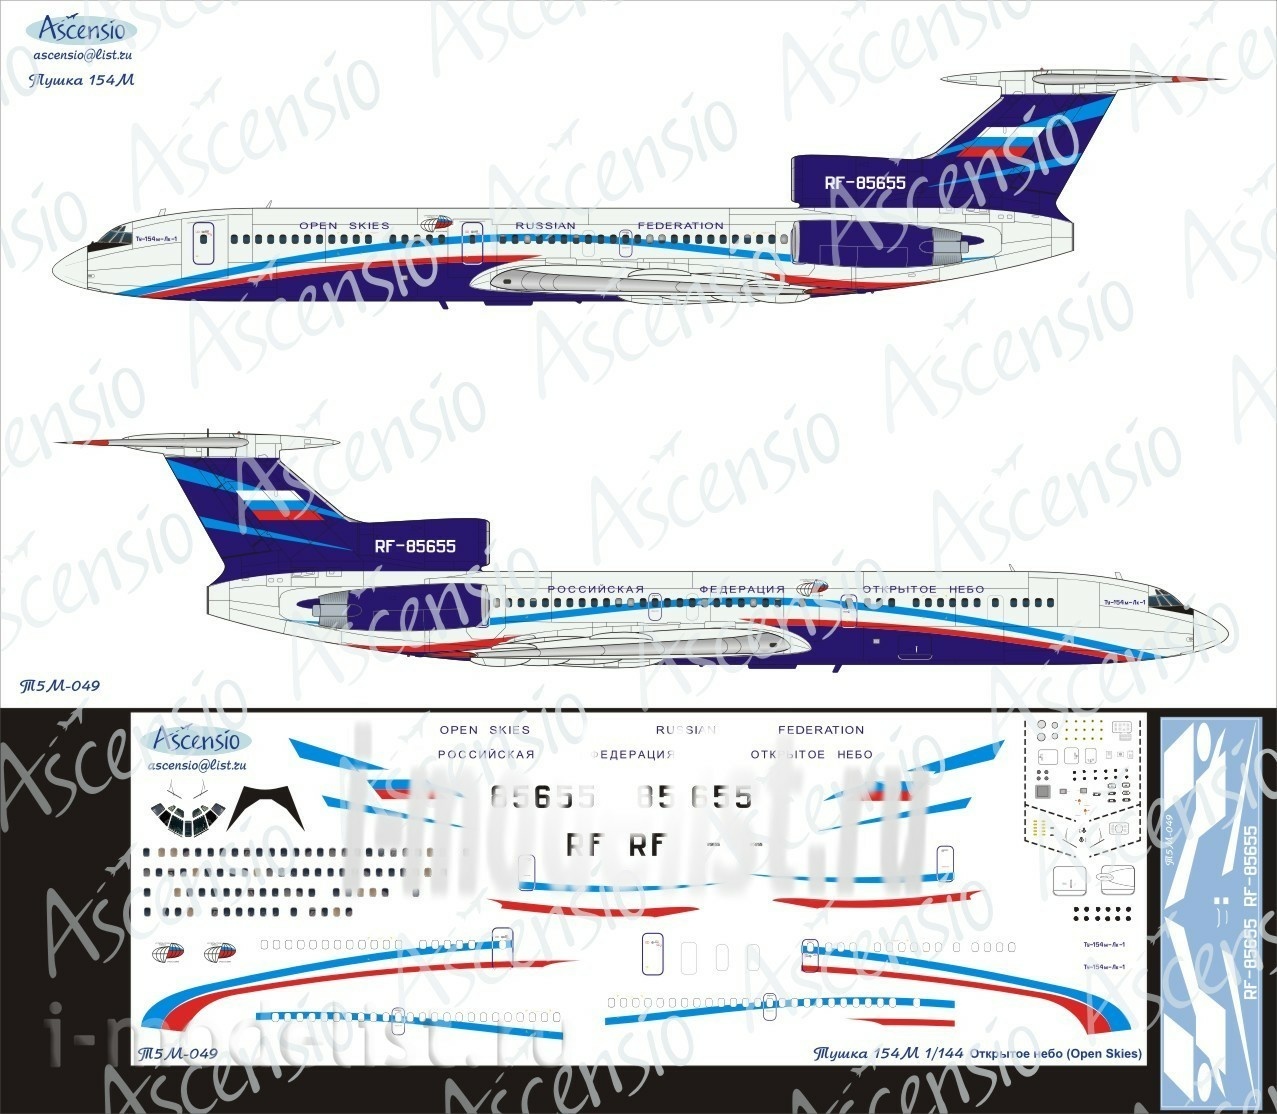 T5M-049 Ascensio 1/144 Decal on the plane carcass-154M (open Sky (Open Sky 85655))